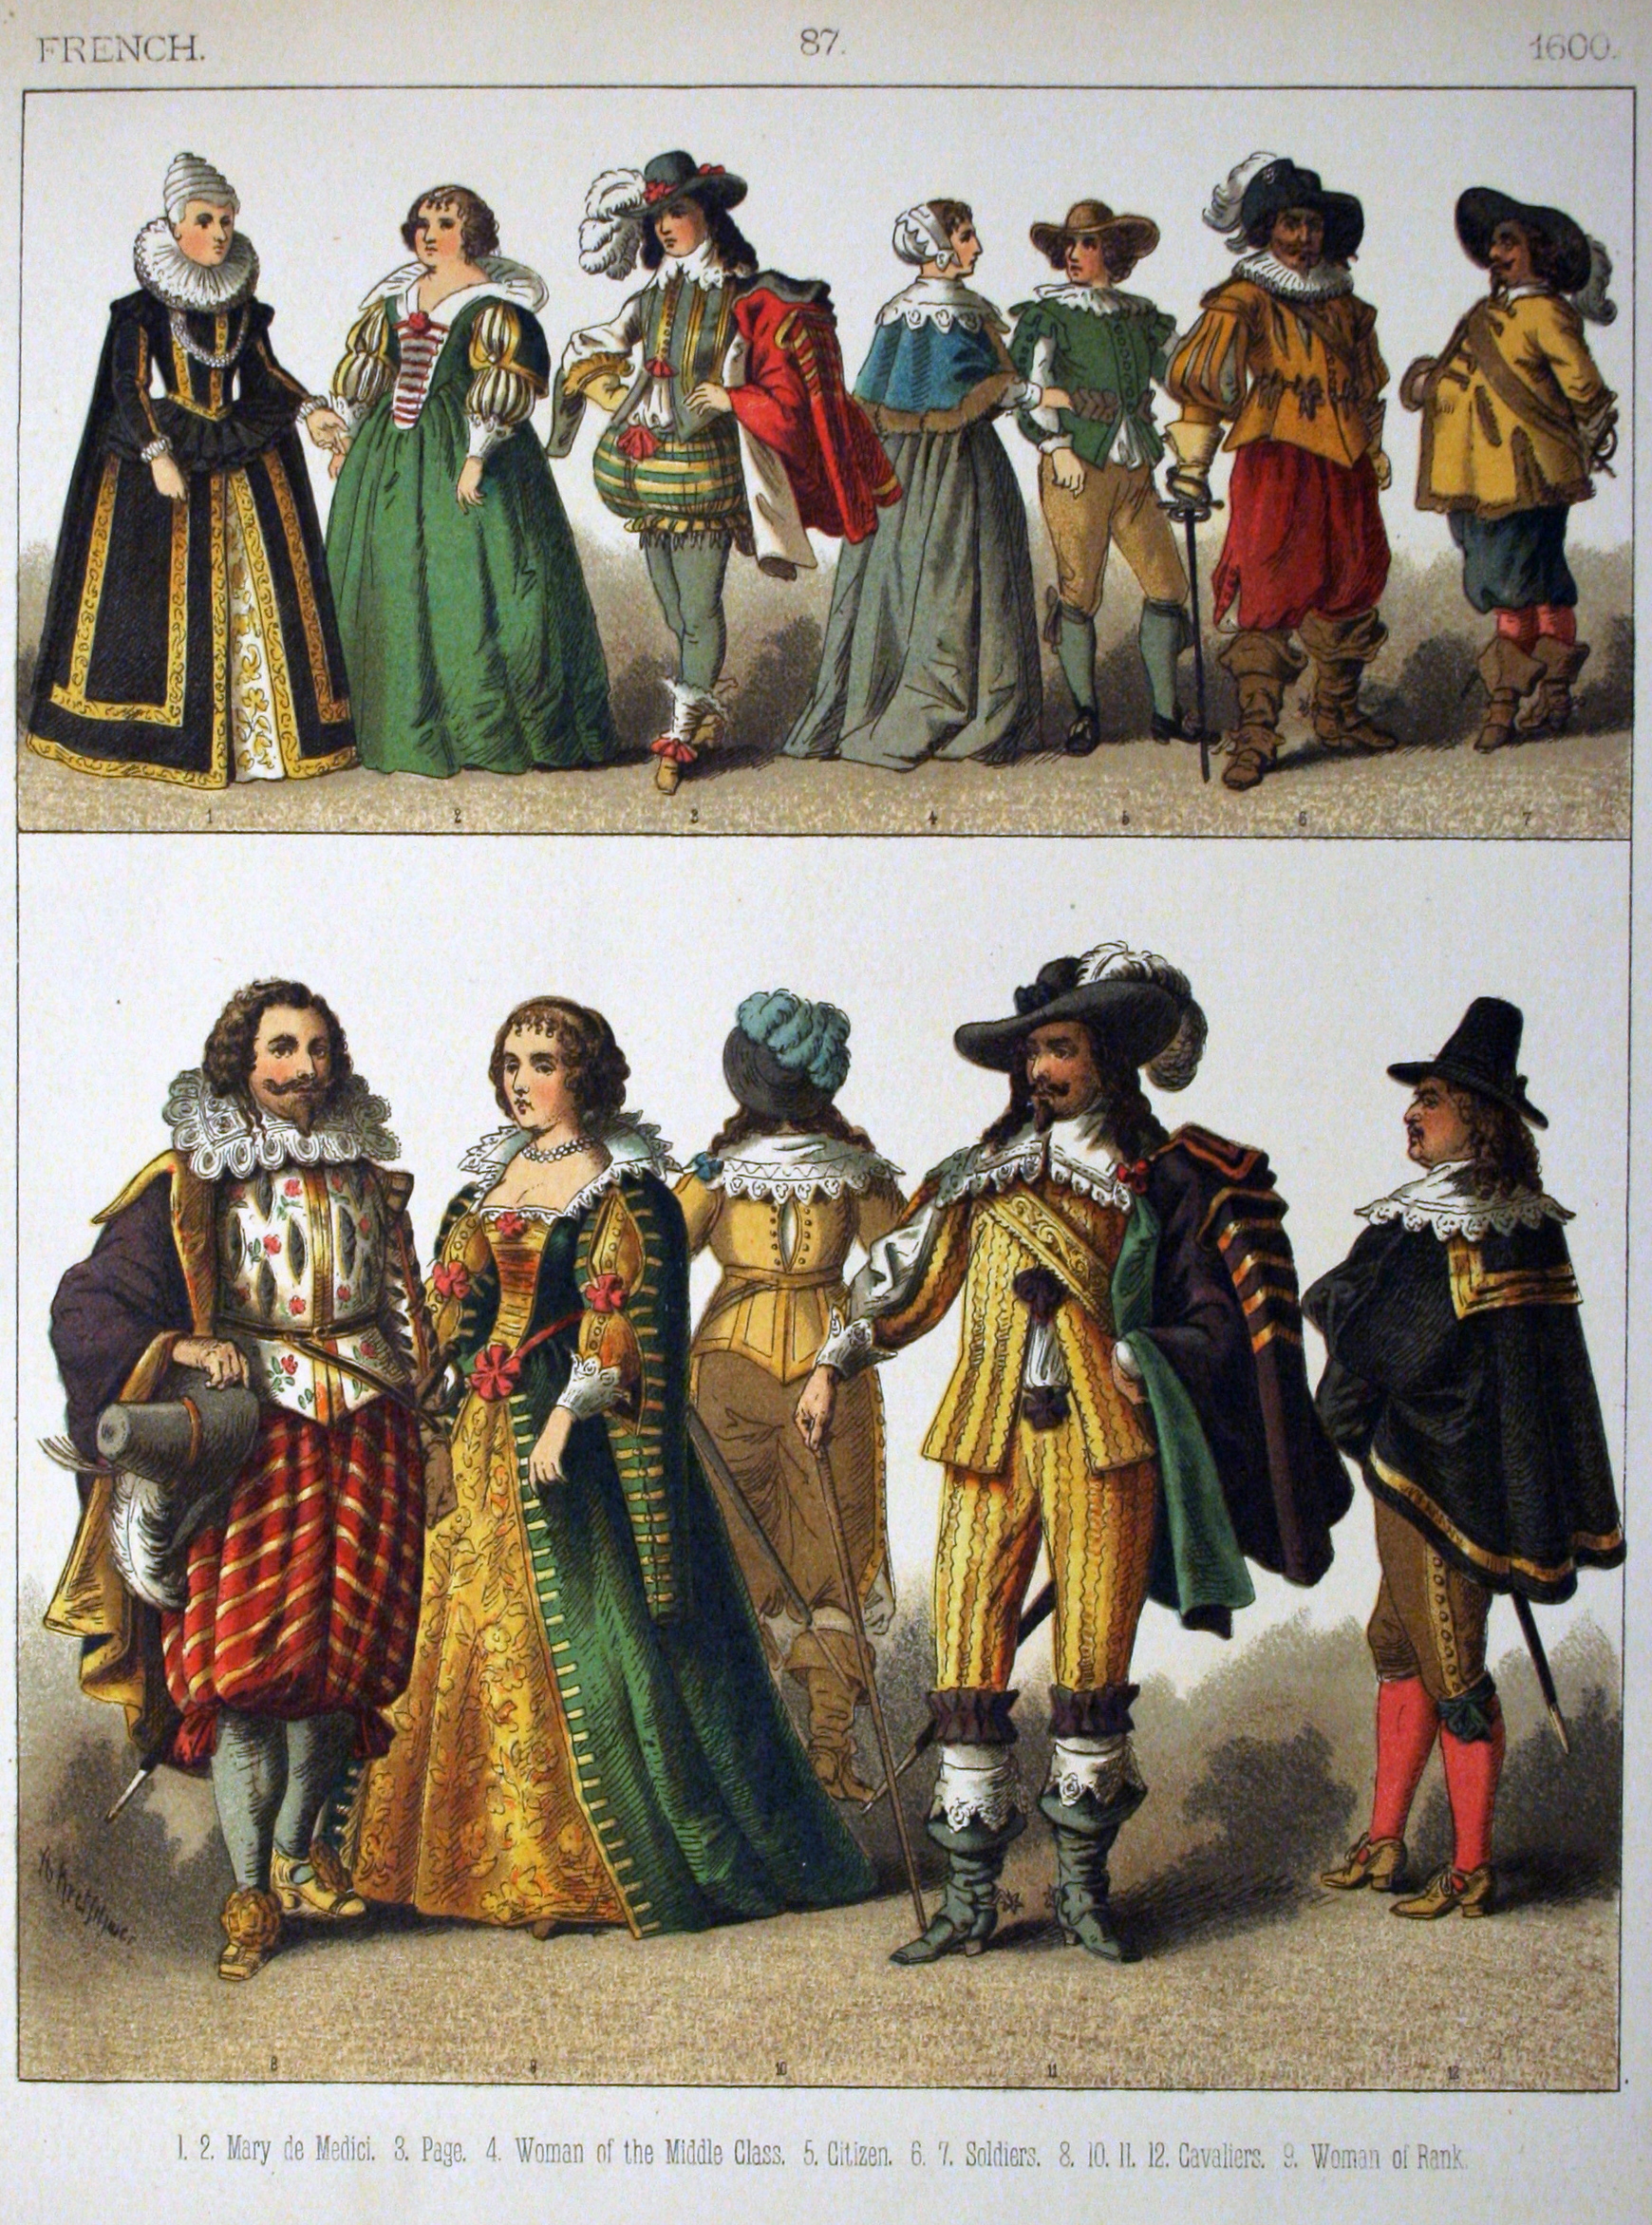 1600, French. - 087 - Costumes of All Nations (1882)